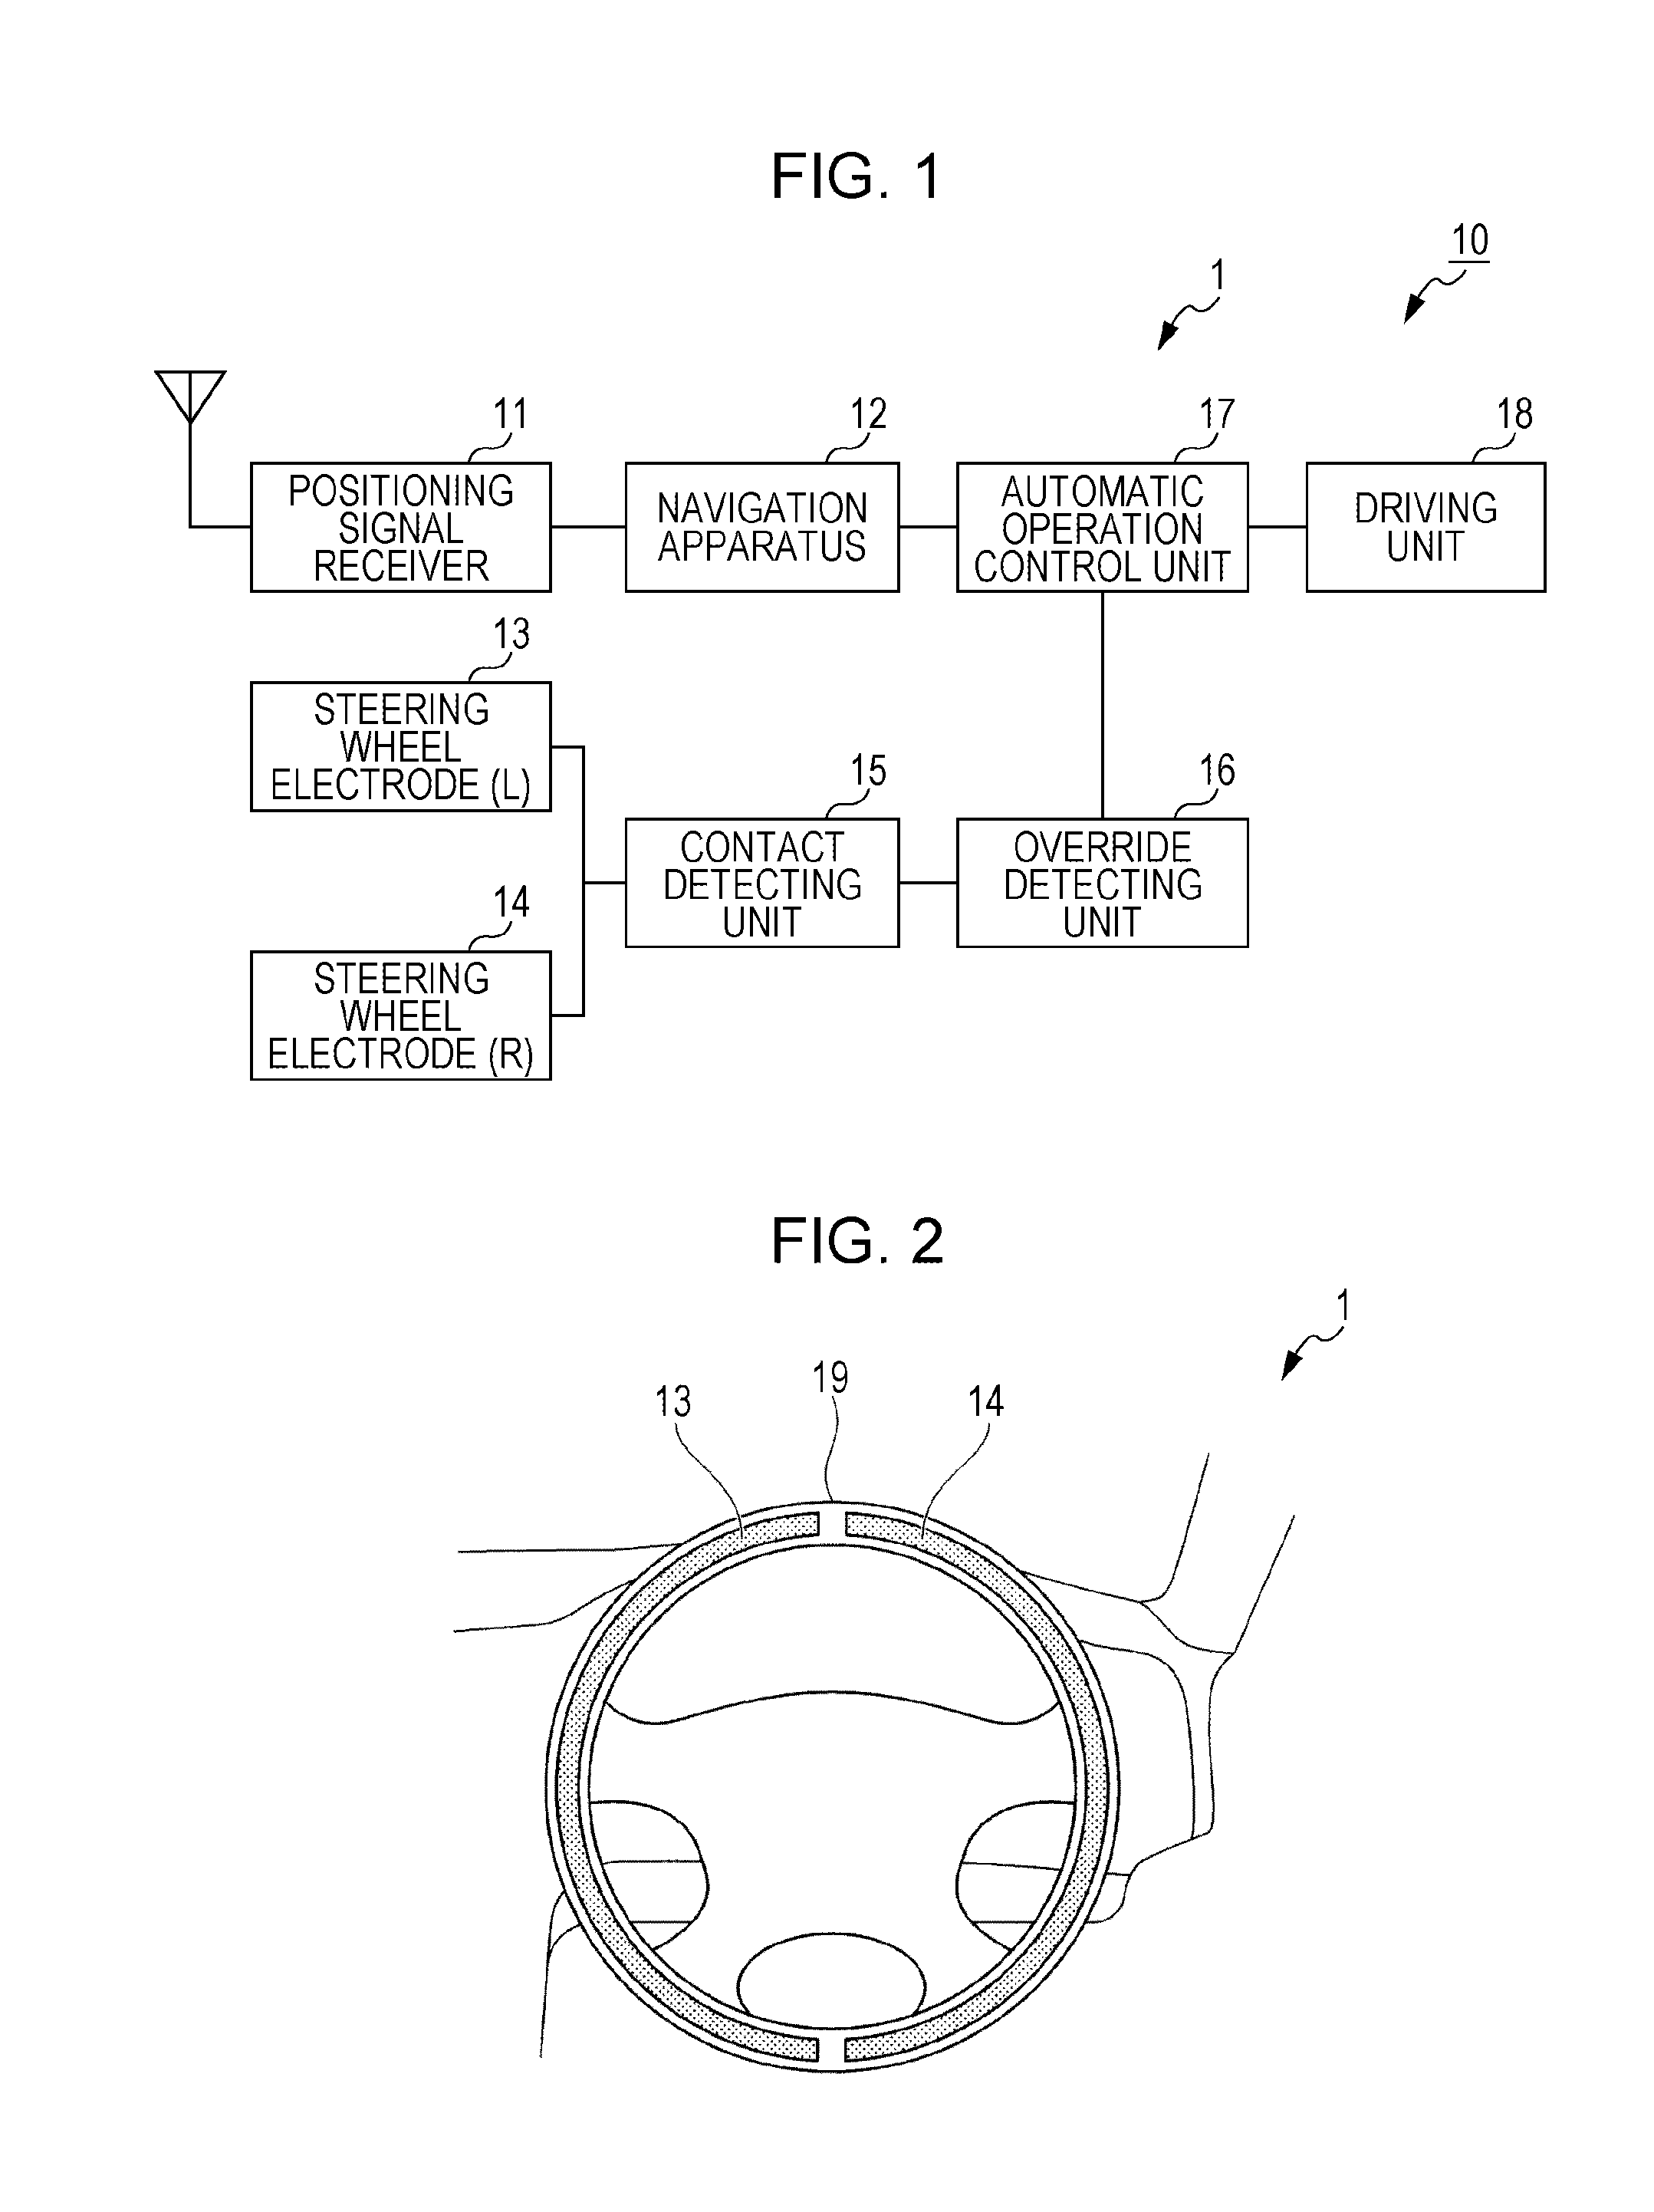 Automatic operation vehicle control apparatus